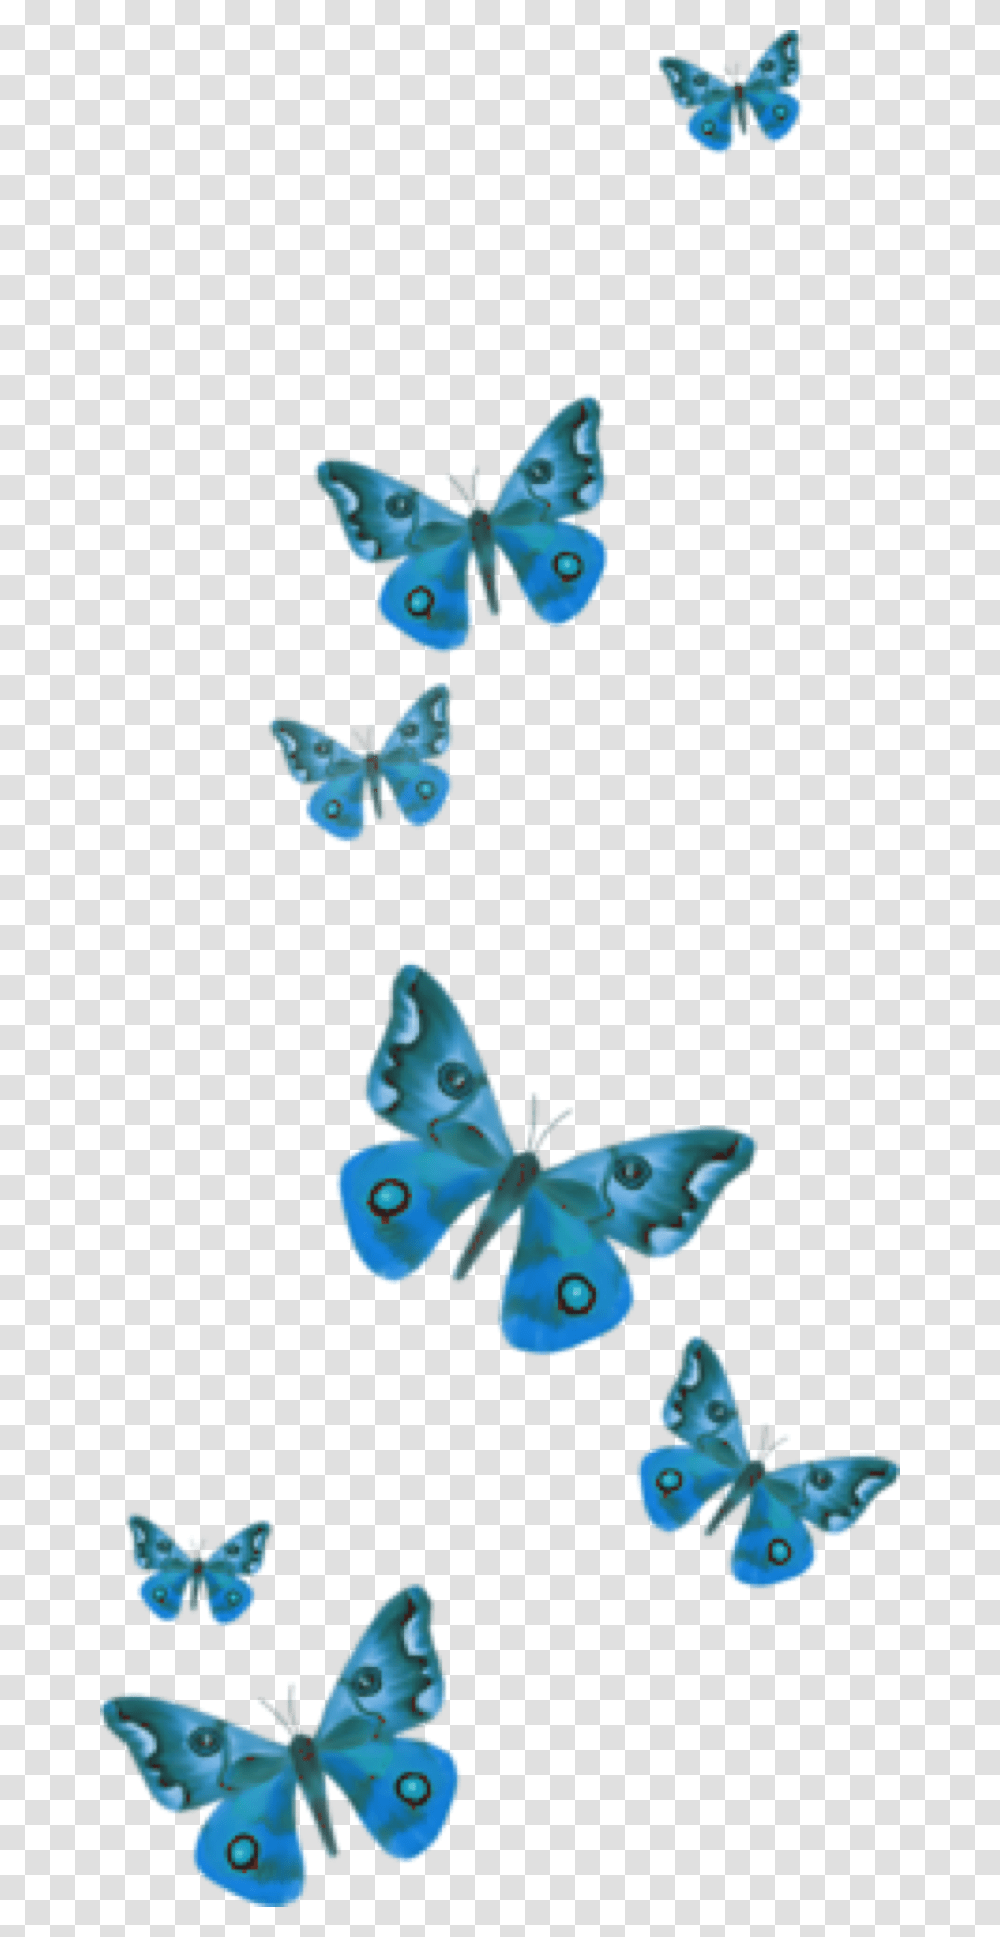 Popular And Trending Butterfly Stickers On Picsart Picsart Butterfly Stickers, Animal, Insect, Invertebrate Transparent Png